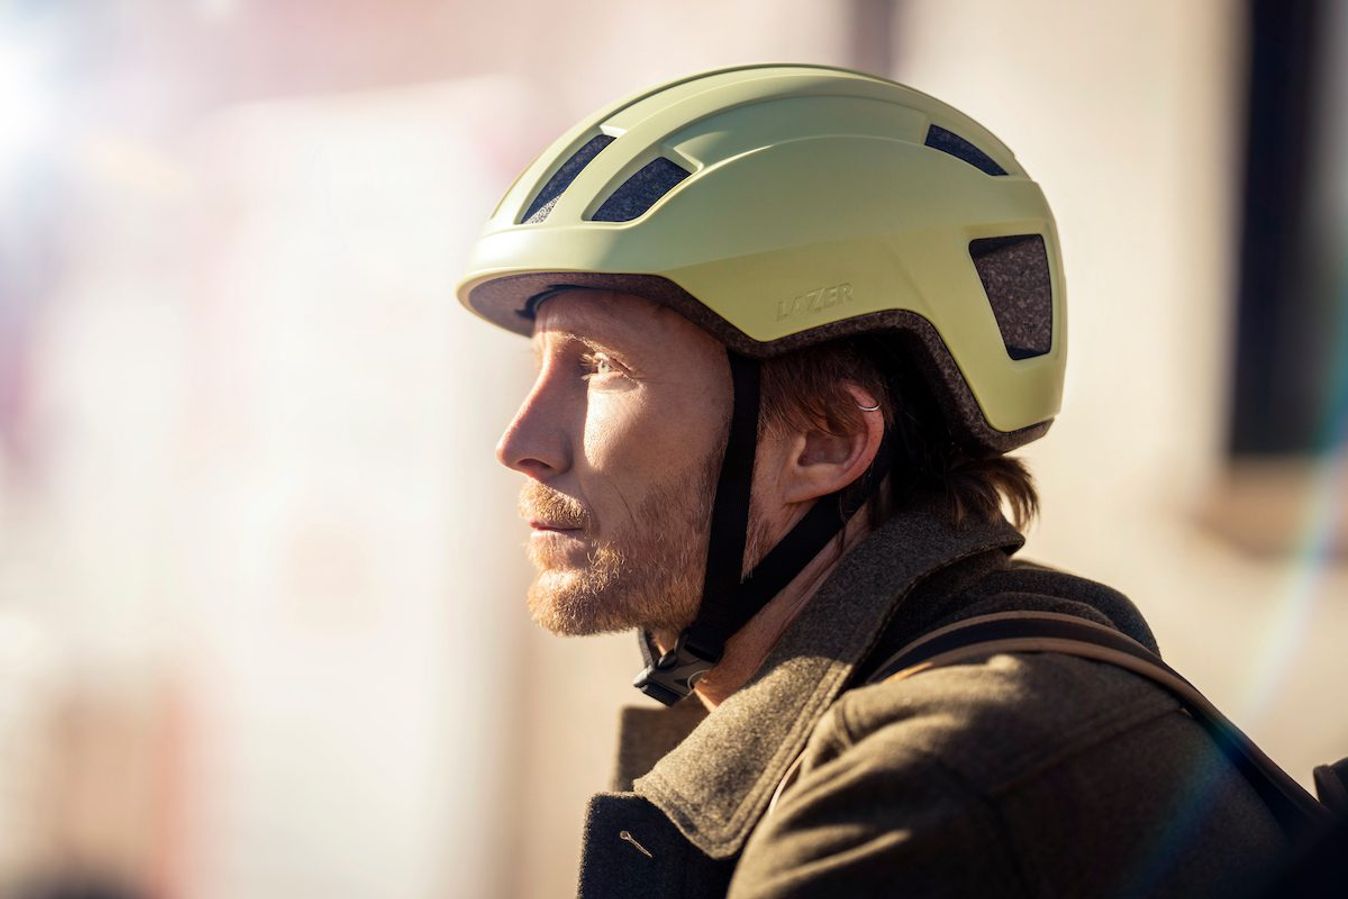 The helmet can be dismantled to recycle the separate components